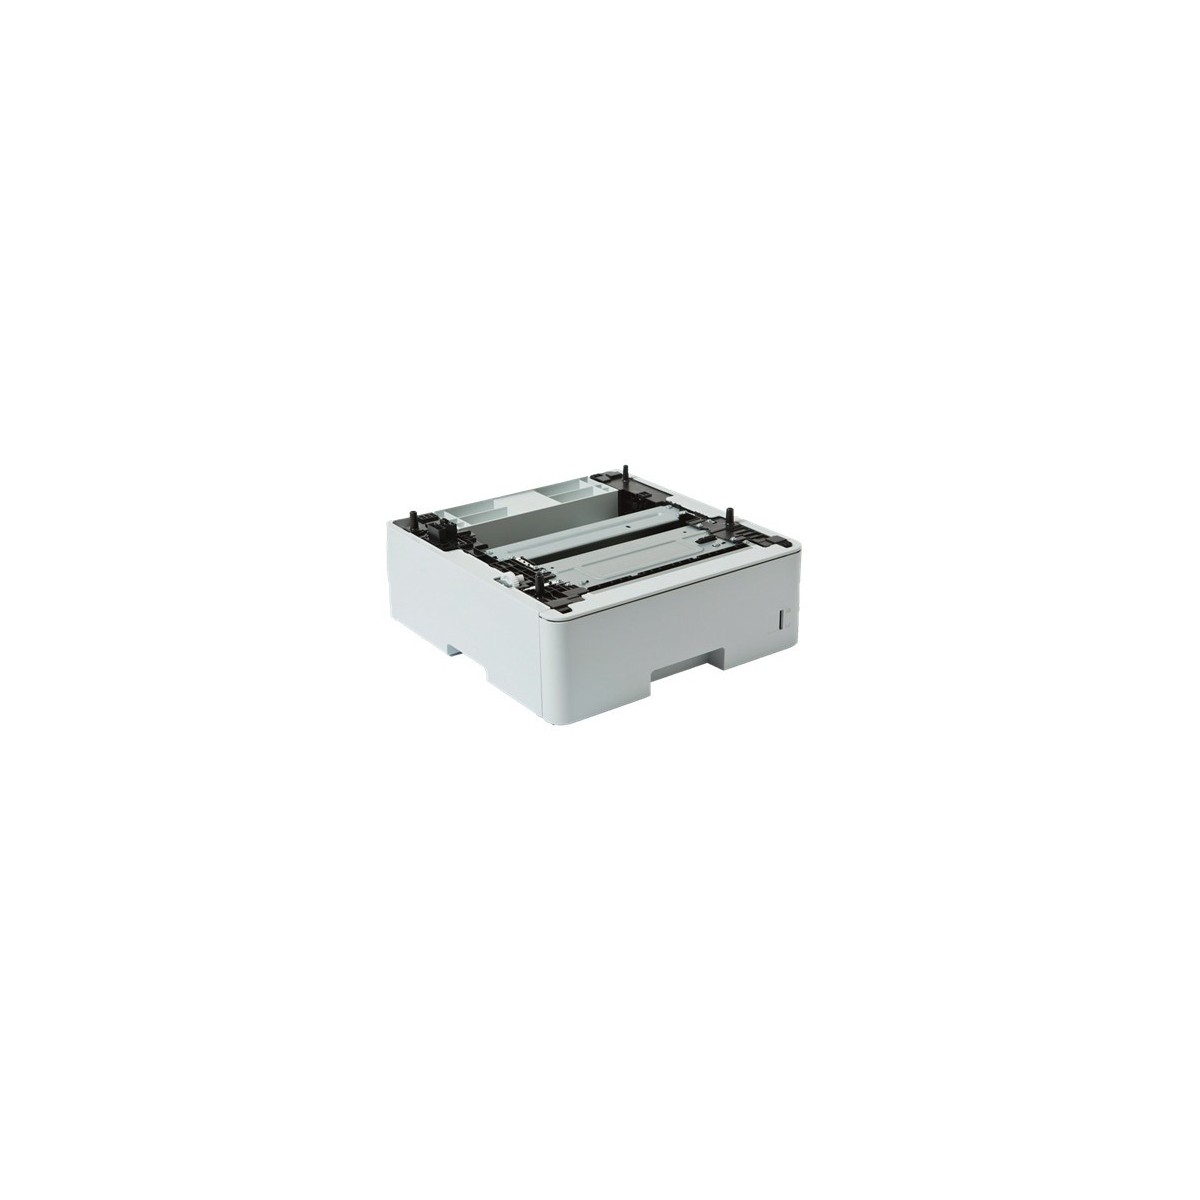 Brother LT-6505 - Auto document feeder (ADF) - Brother - HL-L6400DW - 520 sheets - Gray